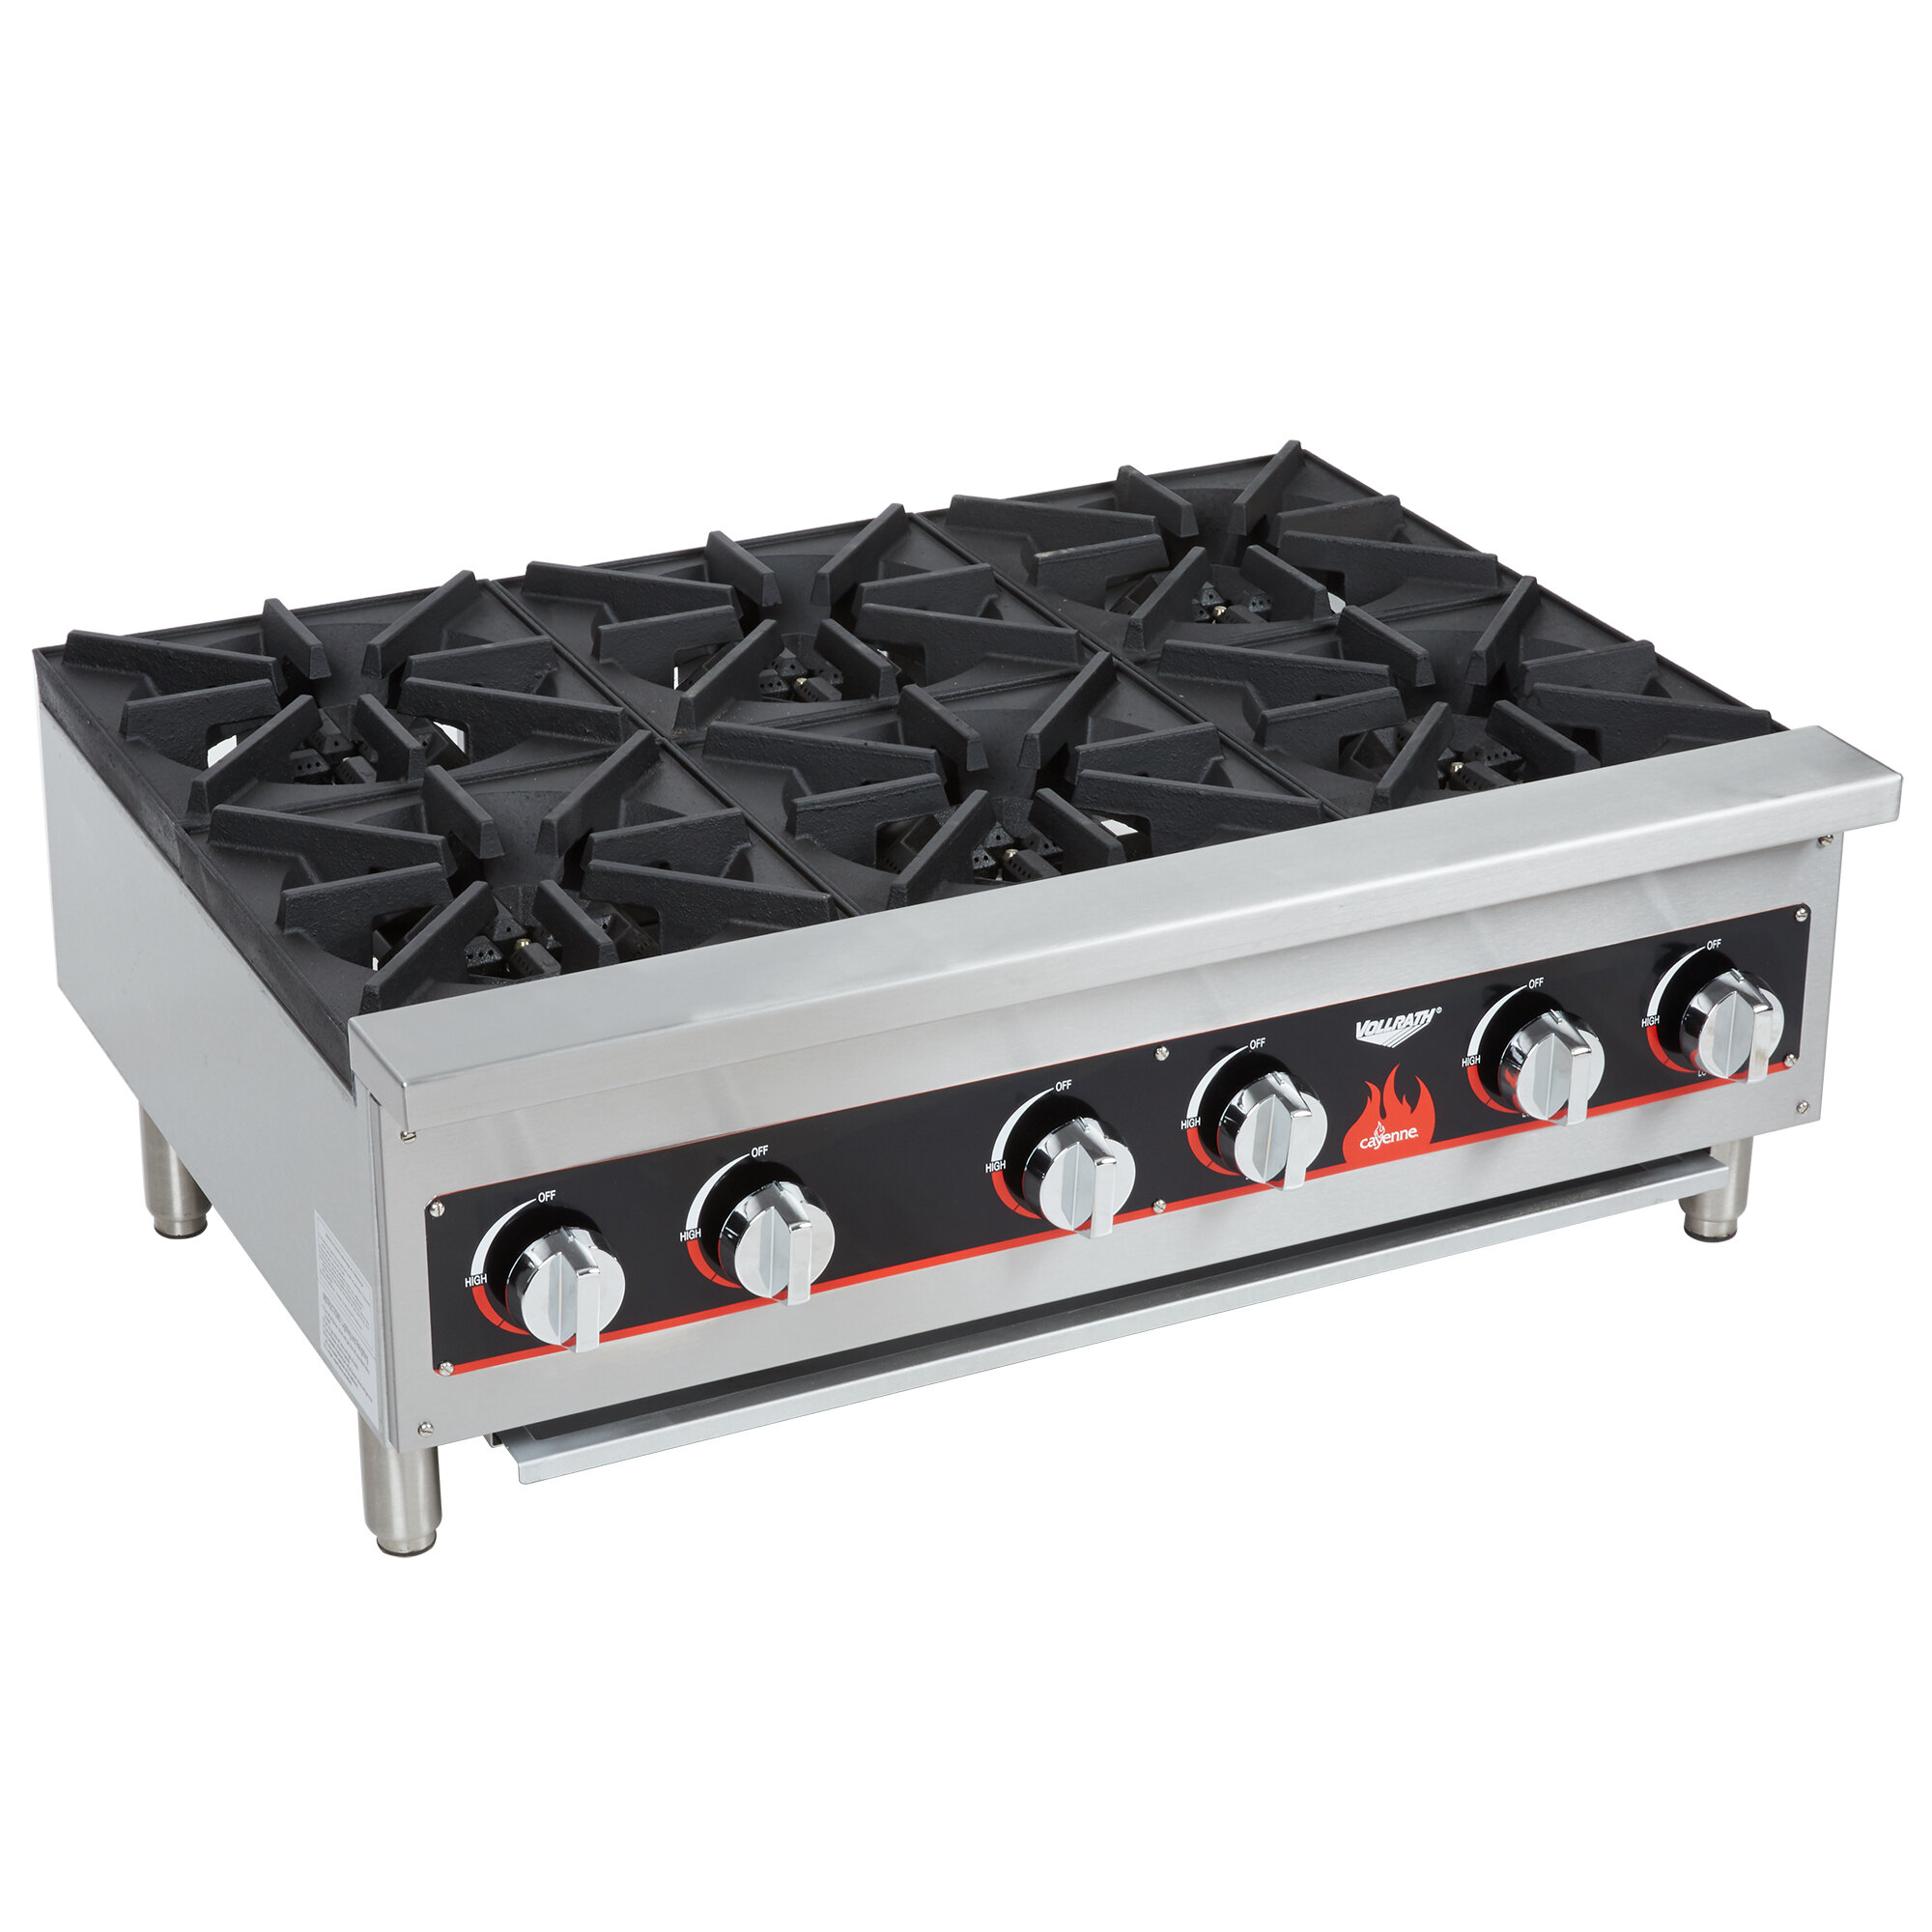 Modern 6 Burner Stove Top with Simple Decor